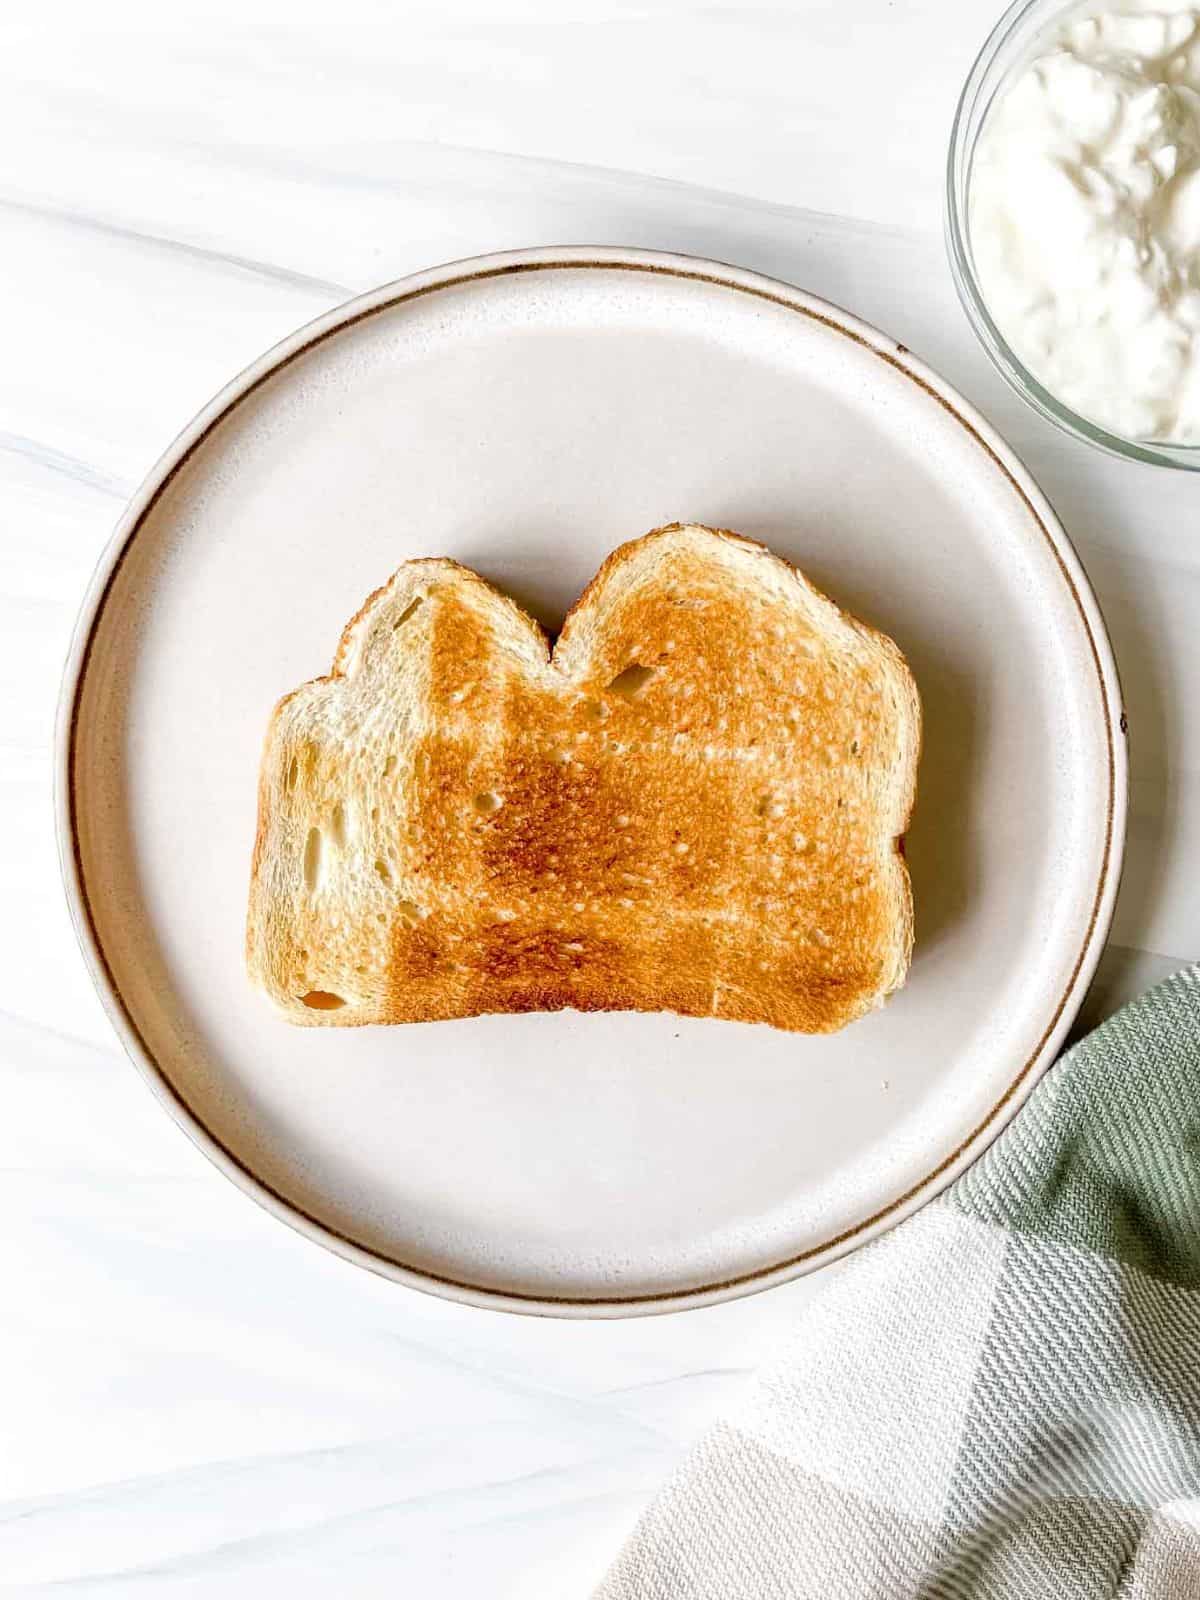 slice of toasted bread on a cream plate next to a bowl of cottage cheese and a green and white checked cloth.